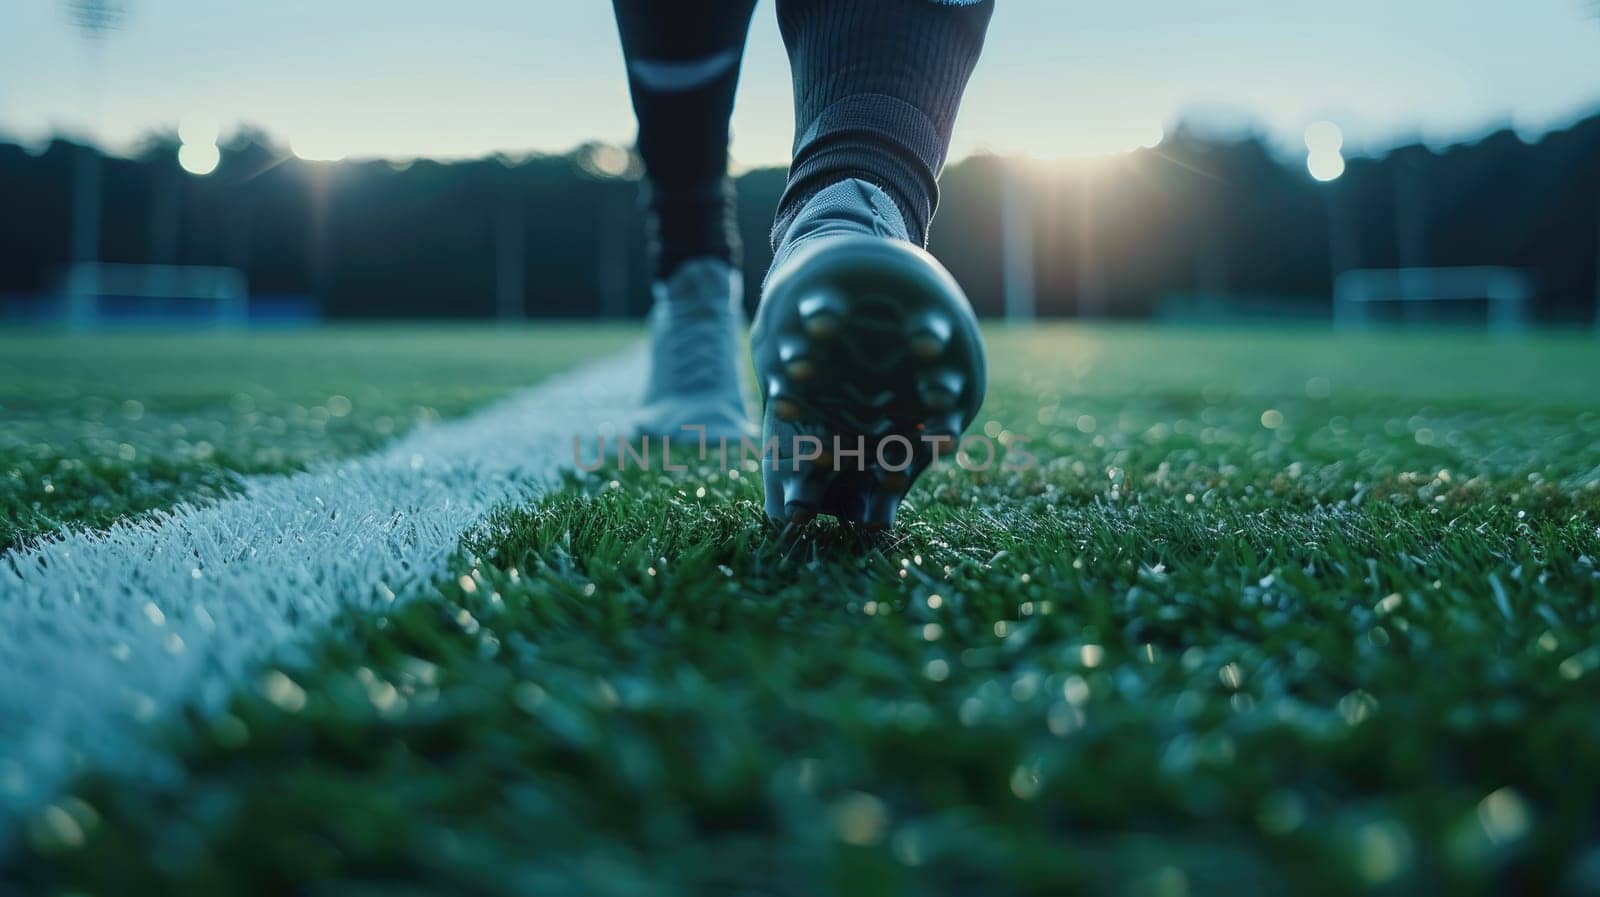 A athlete's feet in soccer shoes in the stadium, Soccer player feet standing on the green grass at stadium.